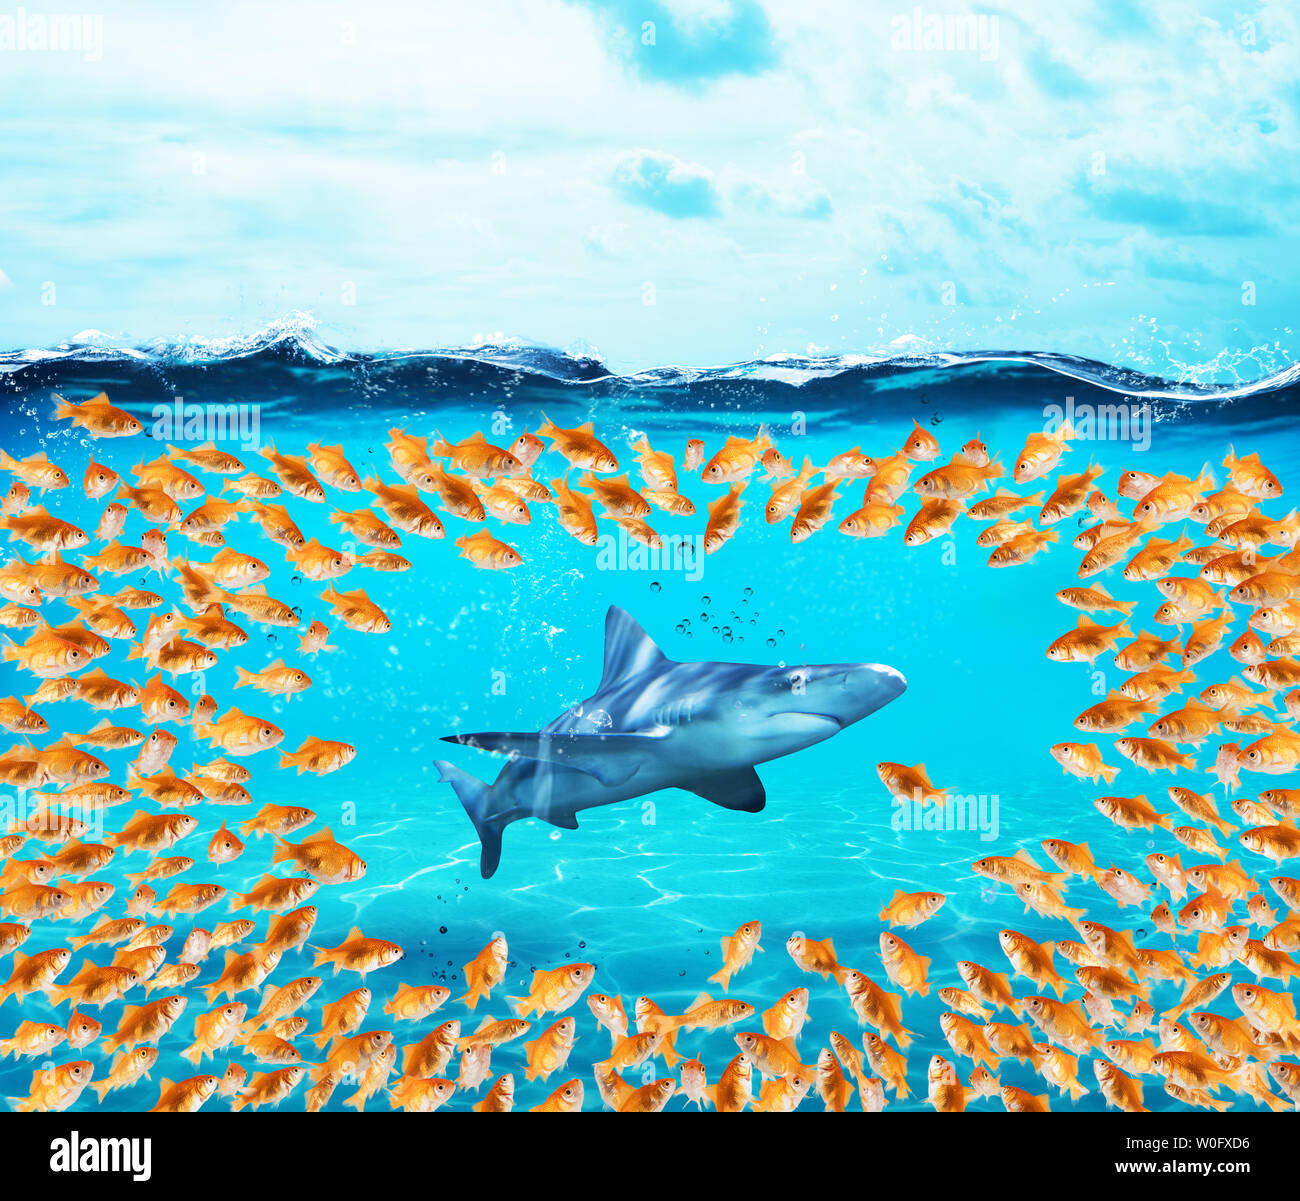 Goldfishes group surround the shark. Concept of unity is strenght,teamwork and partnership Stock Photo